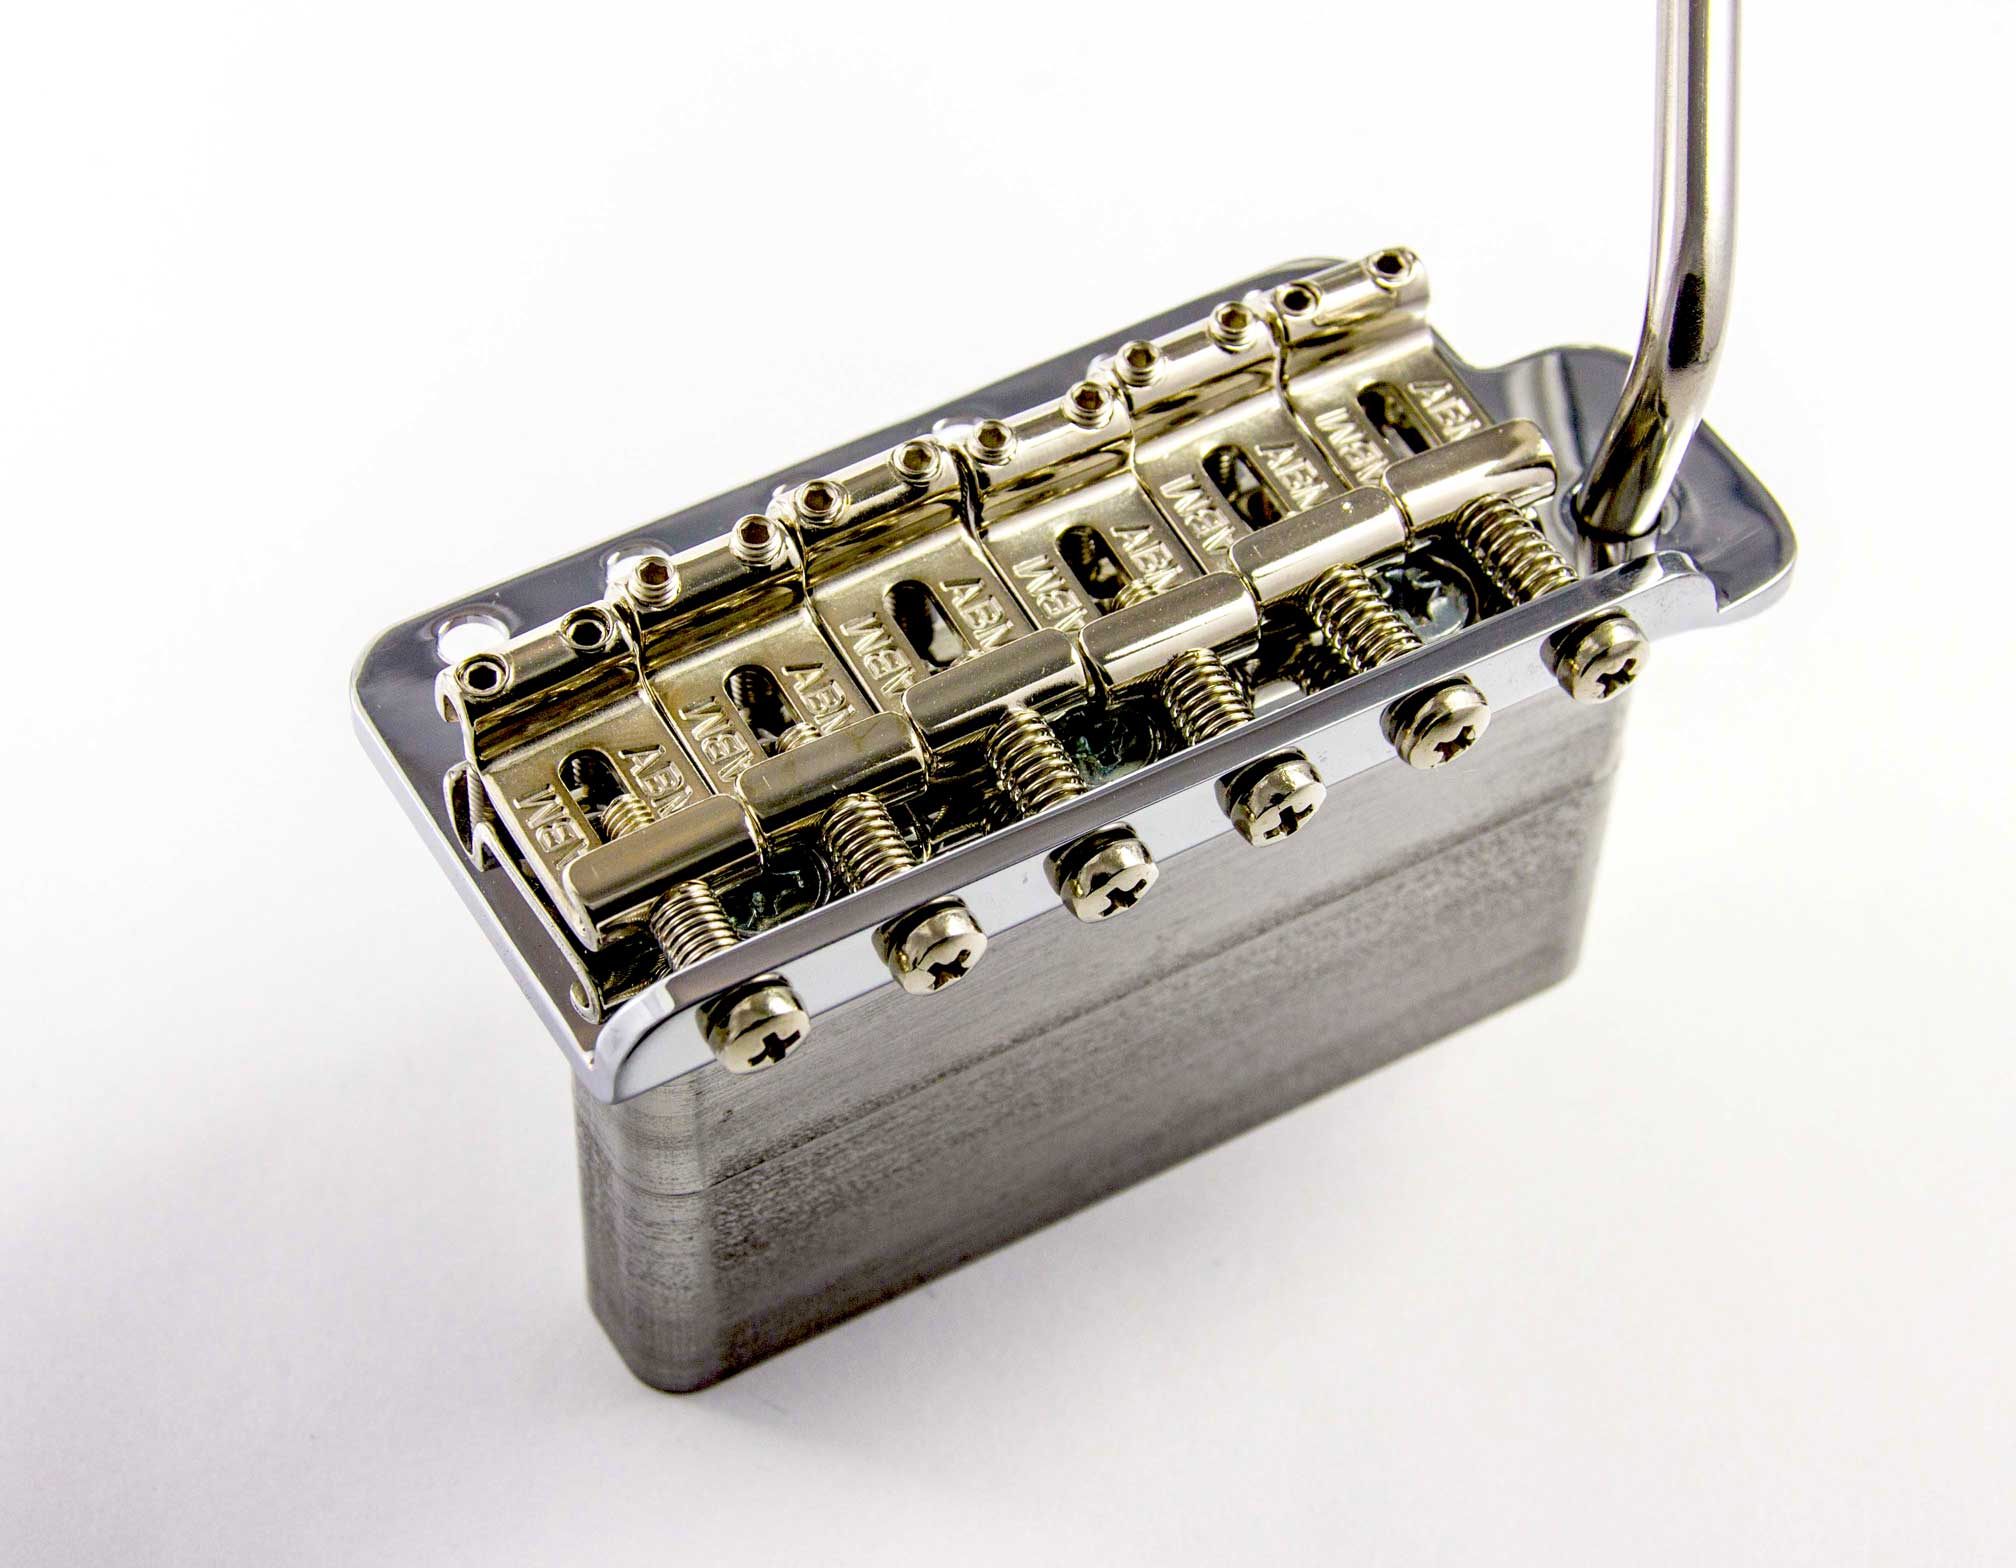 ABM 5050 Tremolo - Sound Upgrade for any S-style guitar